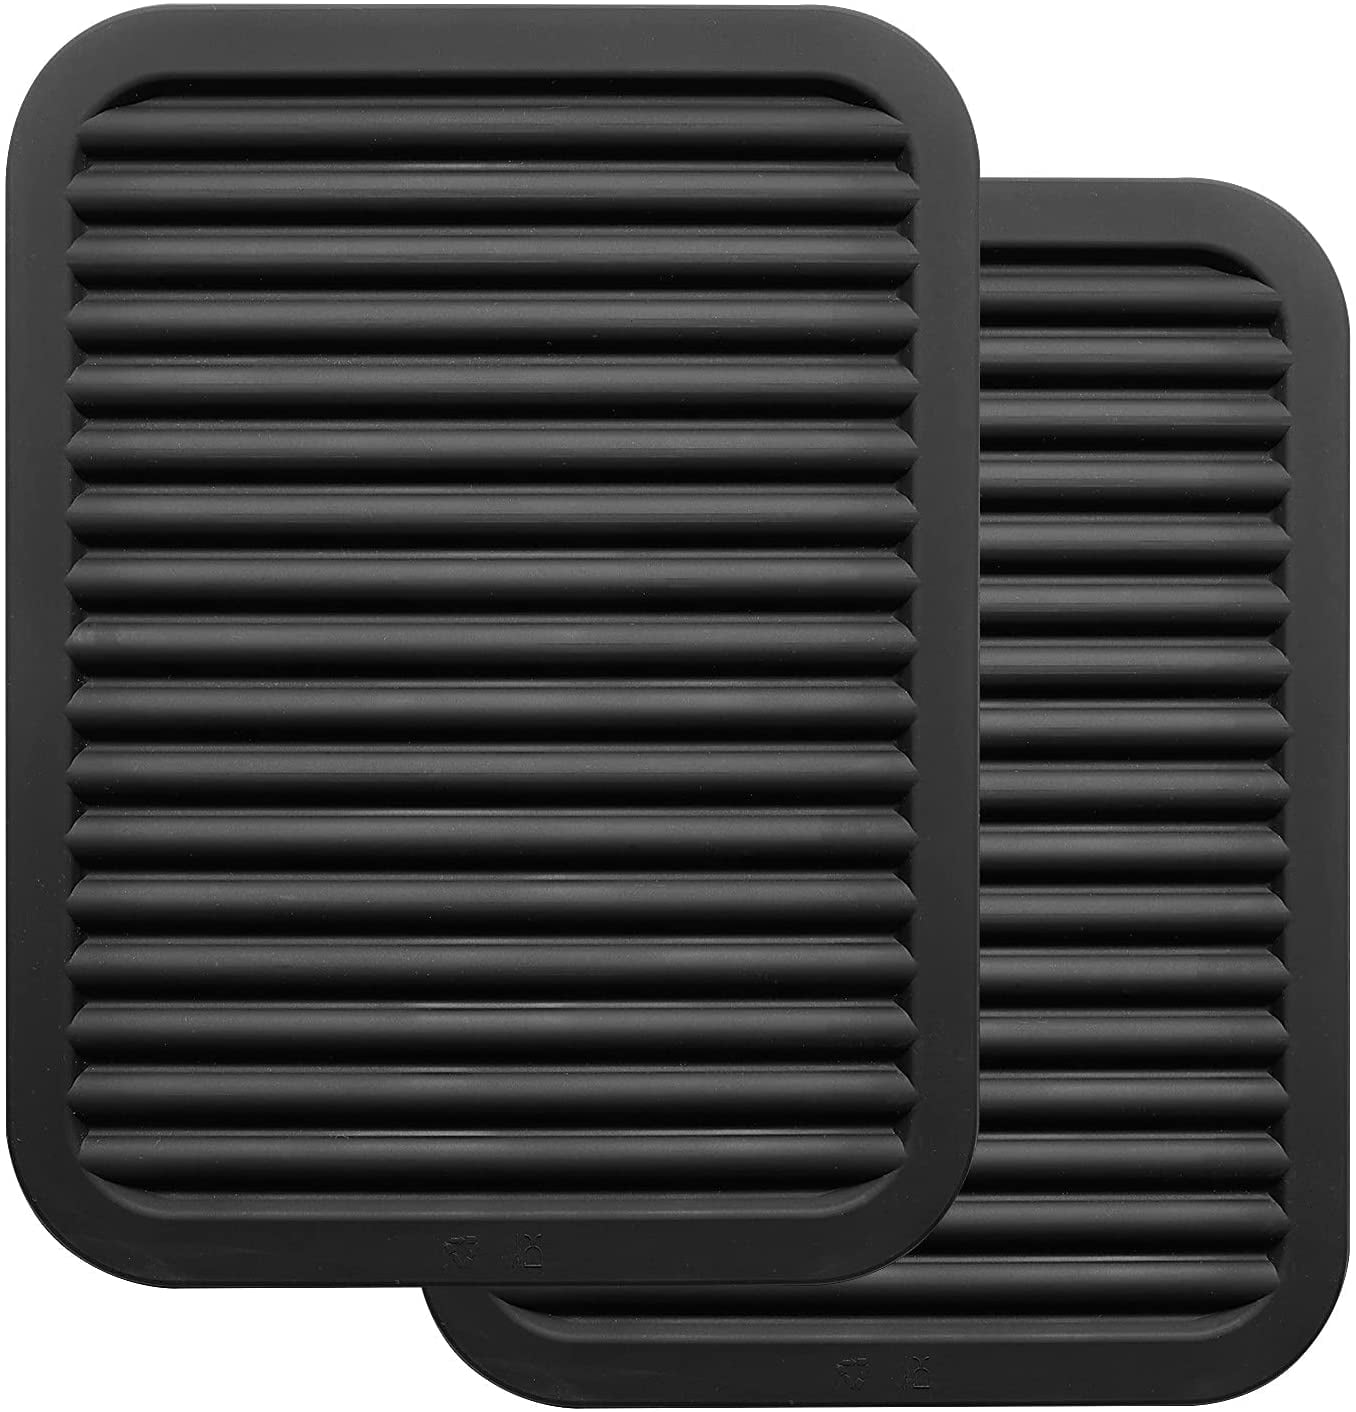 ME.FAN Large Silicone Trivets Silicone Pot Holders/Spoon Rest/Kitchen Table Mat Insulated Flexible Black Non Slip Hot Pads and Large Coasters 2 Set Durable 